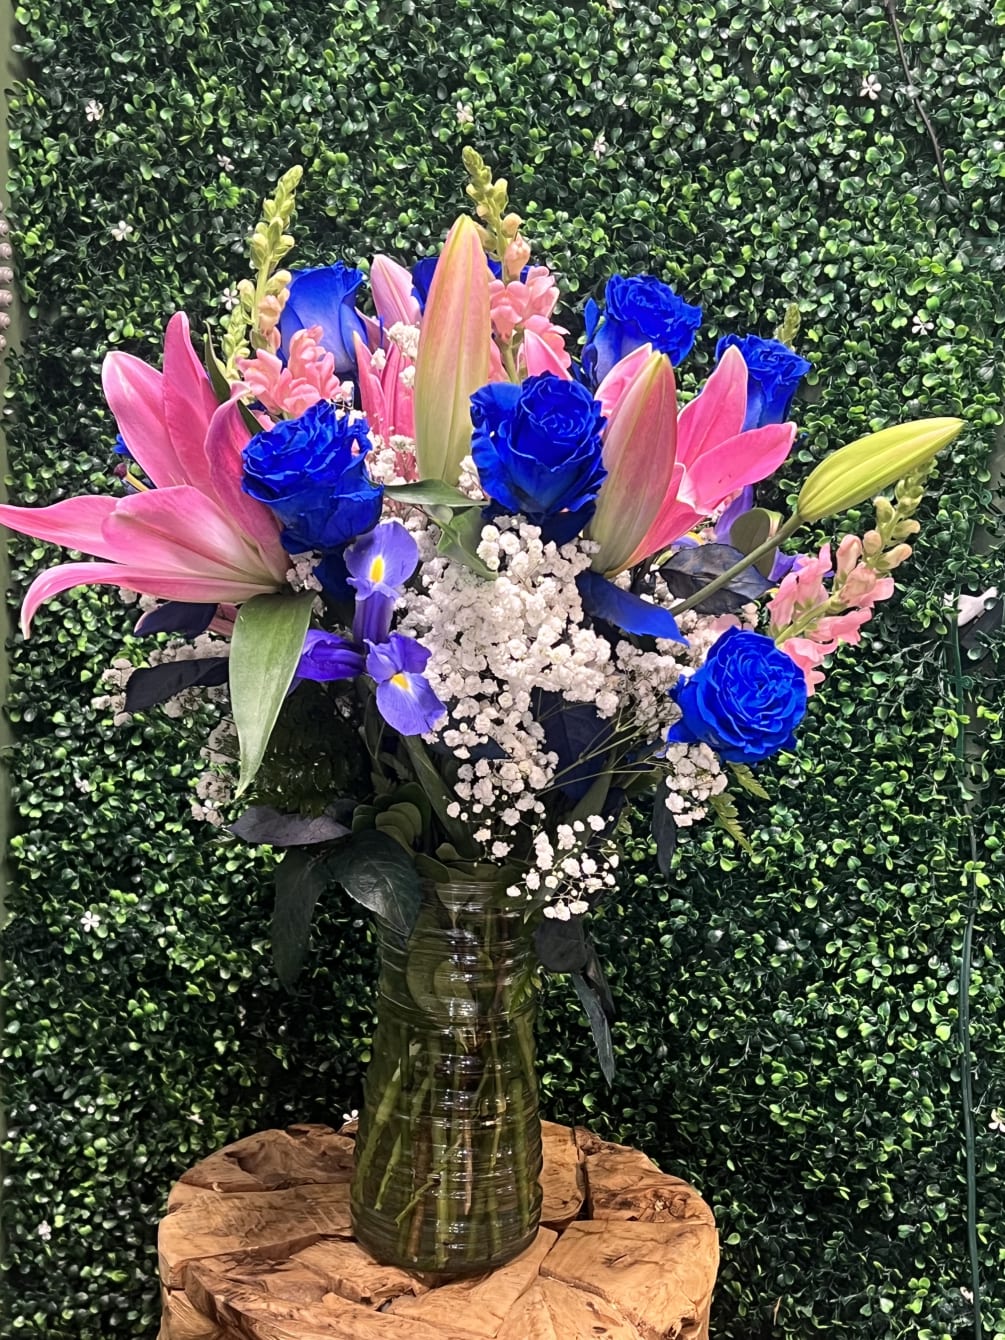 Deep blue roses, pink oriental lilies, snapdragons, and iris come together to